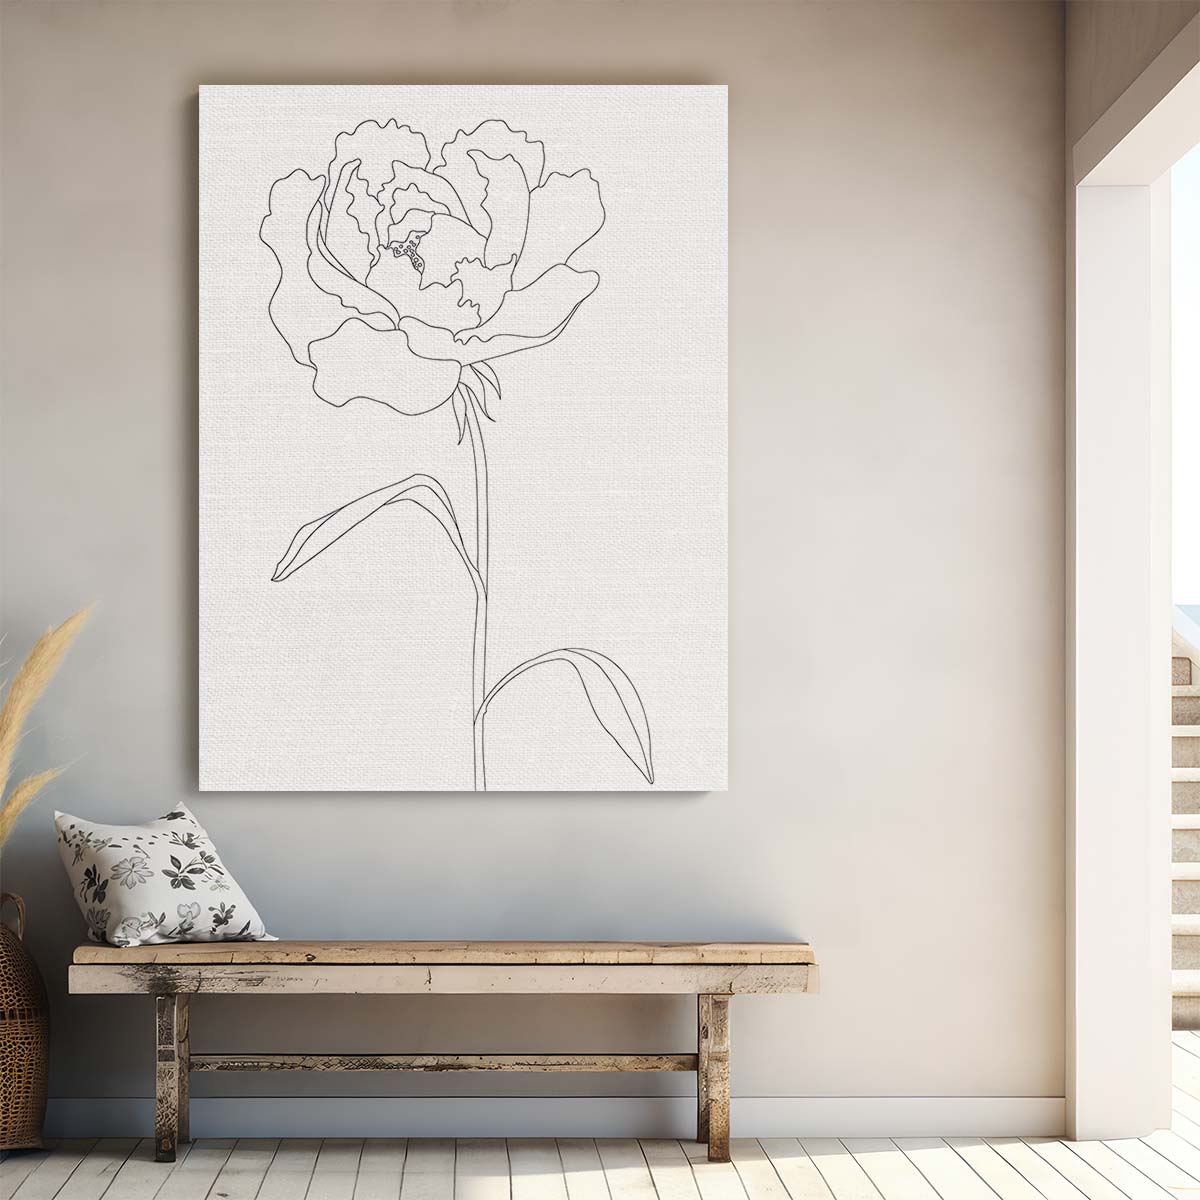 Minimalist Peony Illustration Line Art - Black and White Botanical Sketch by Luxuriance Designs, made in USA